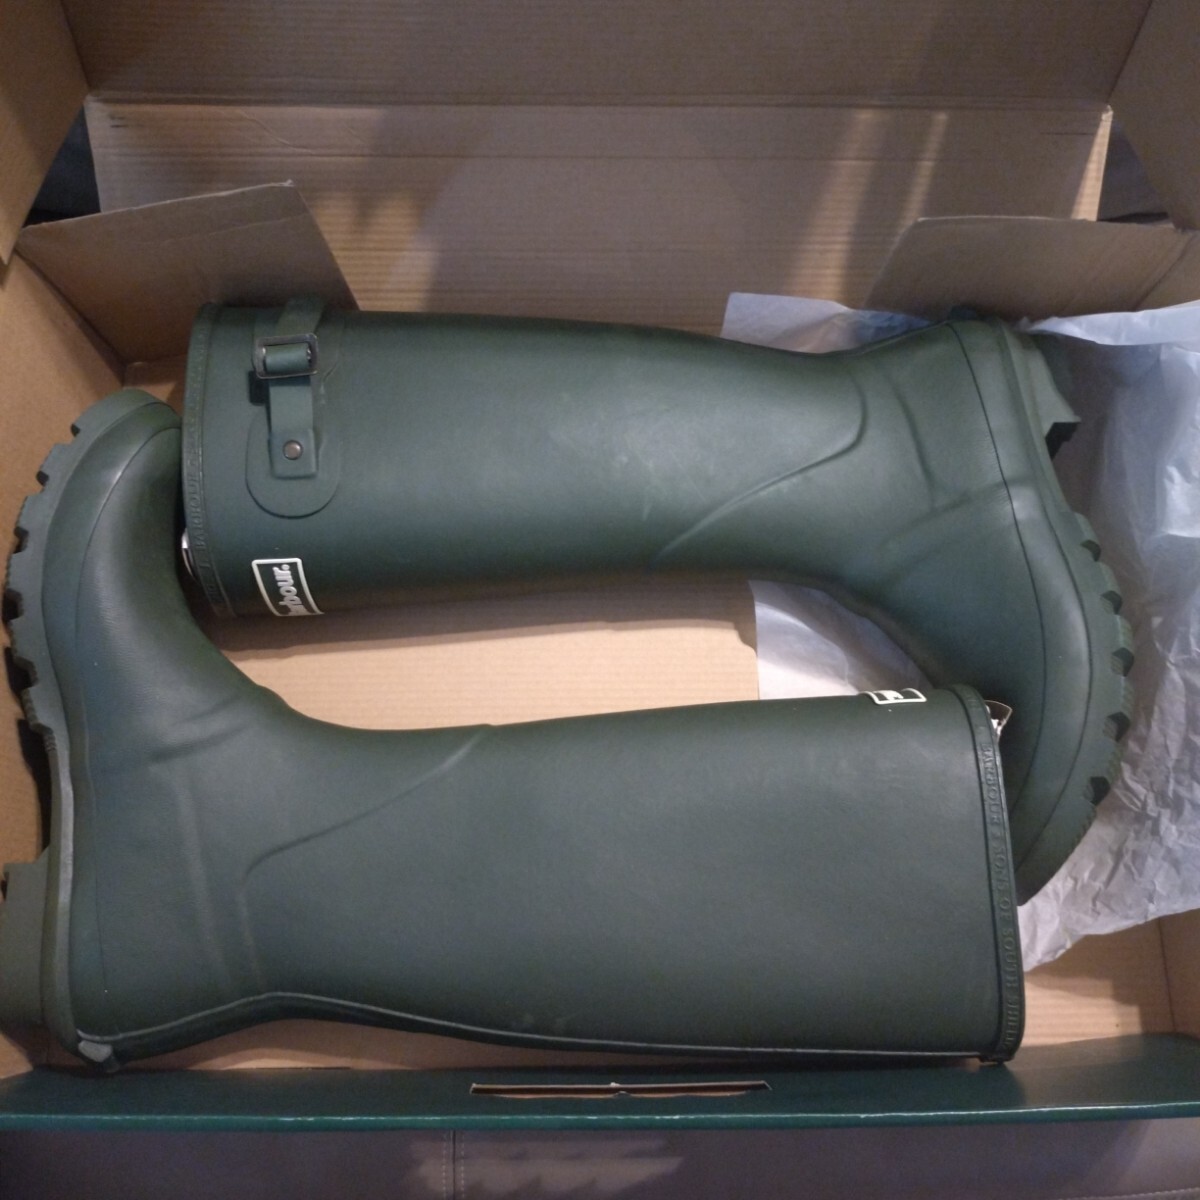  Barbour barbour Bab a-BEDE WILLIE bootwe Lynn ton boots olive olive UK8 Japan size 26.5cm rom and rear (before and after) rain boots new goods including carriage 